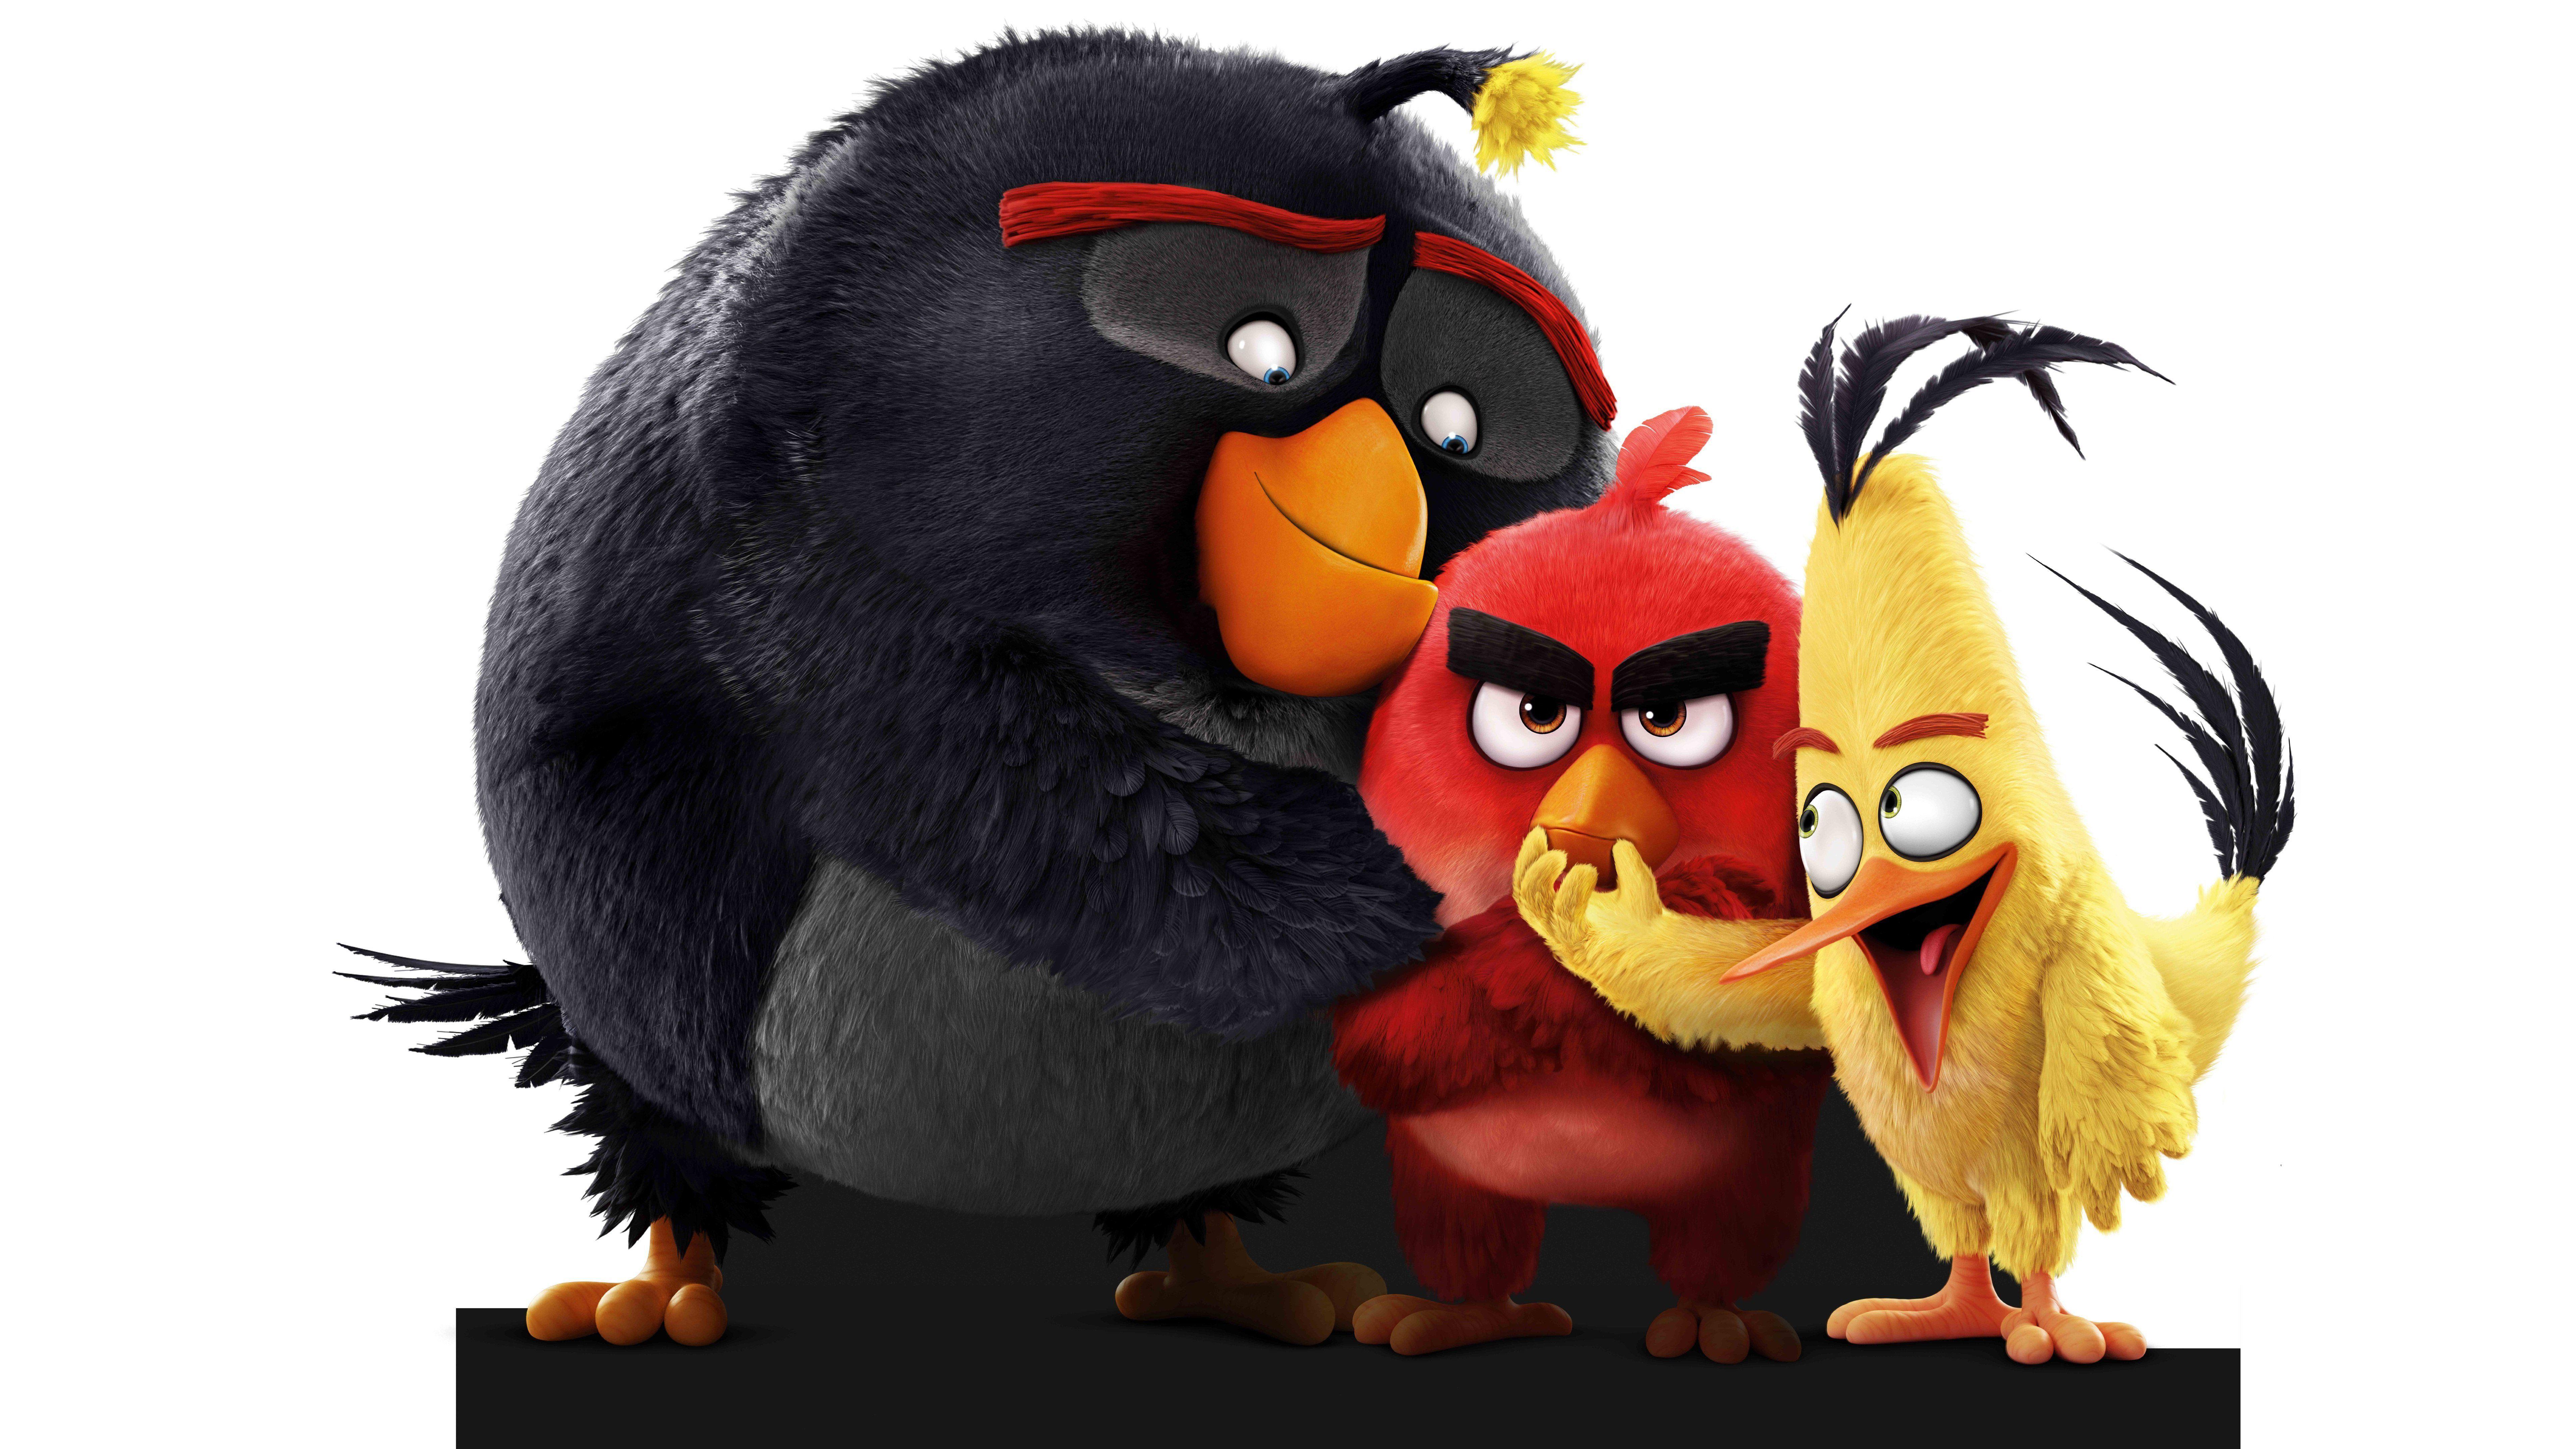 Download The Angry Birds 8k HD 4k Wallpaper In 2048x1152 Screen